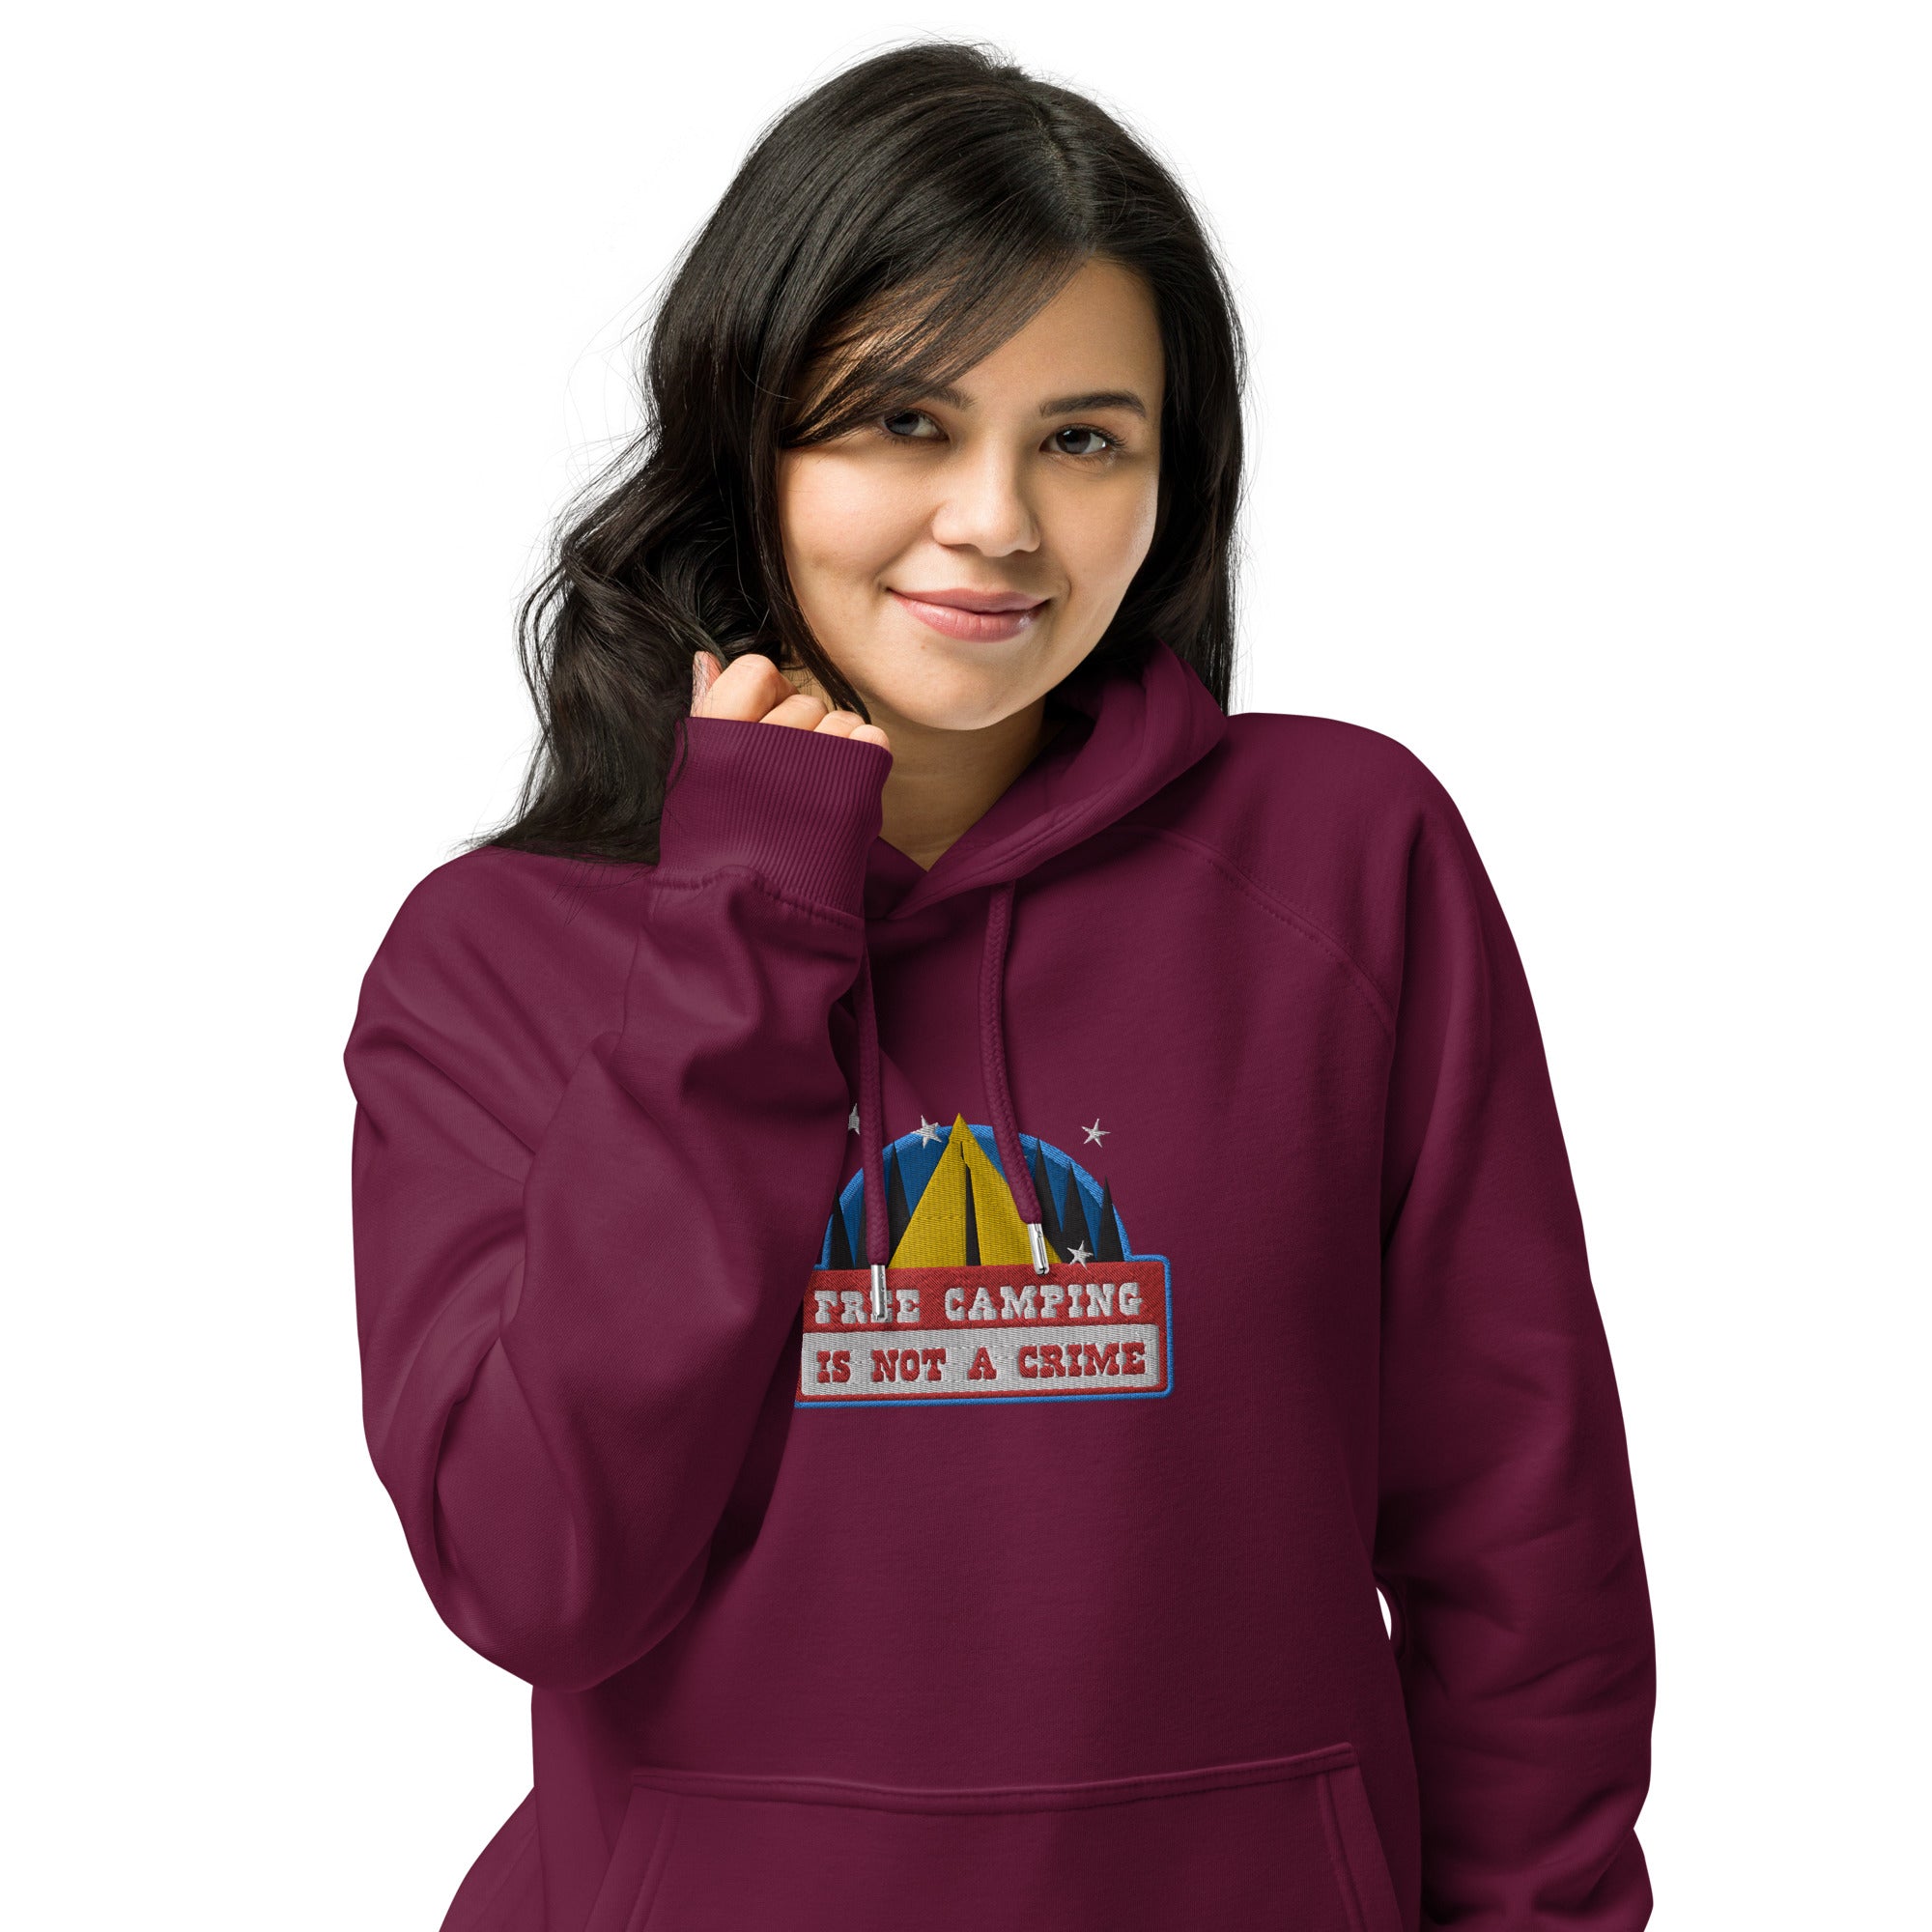 Unisex eco raglan hoodie Free camping is not a crime graphic multicolor embroidered pattern